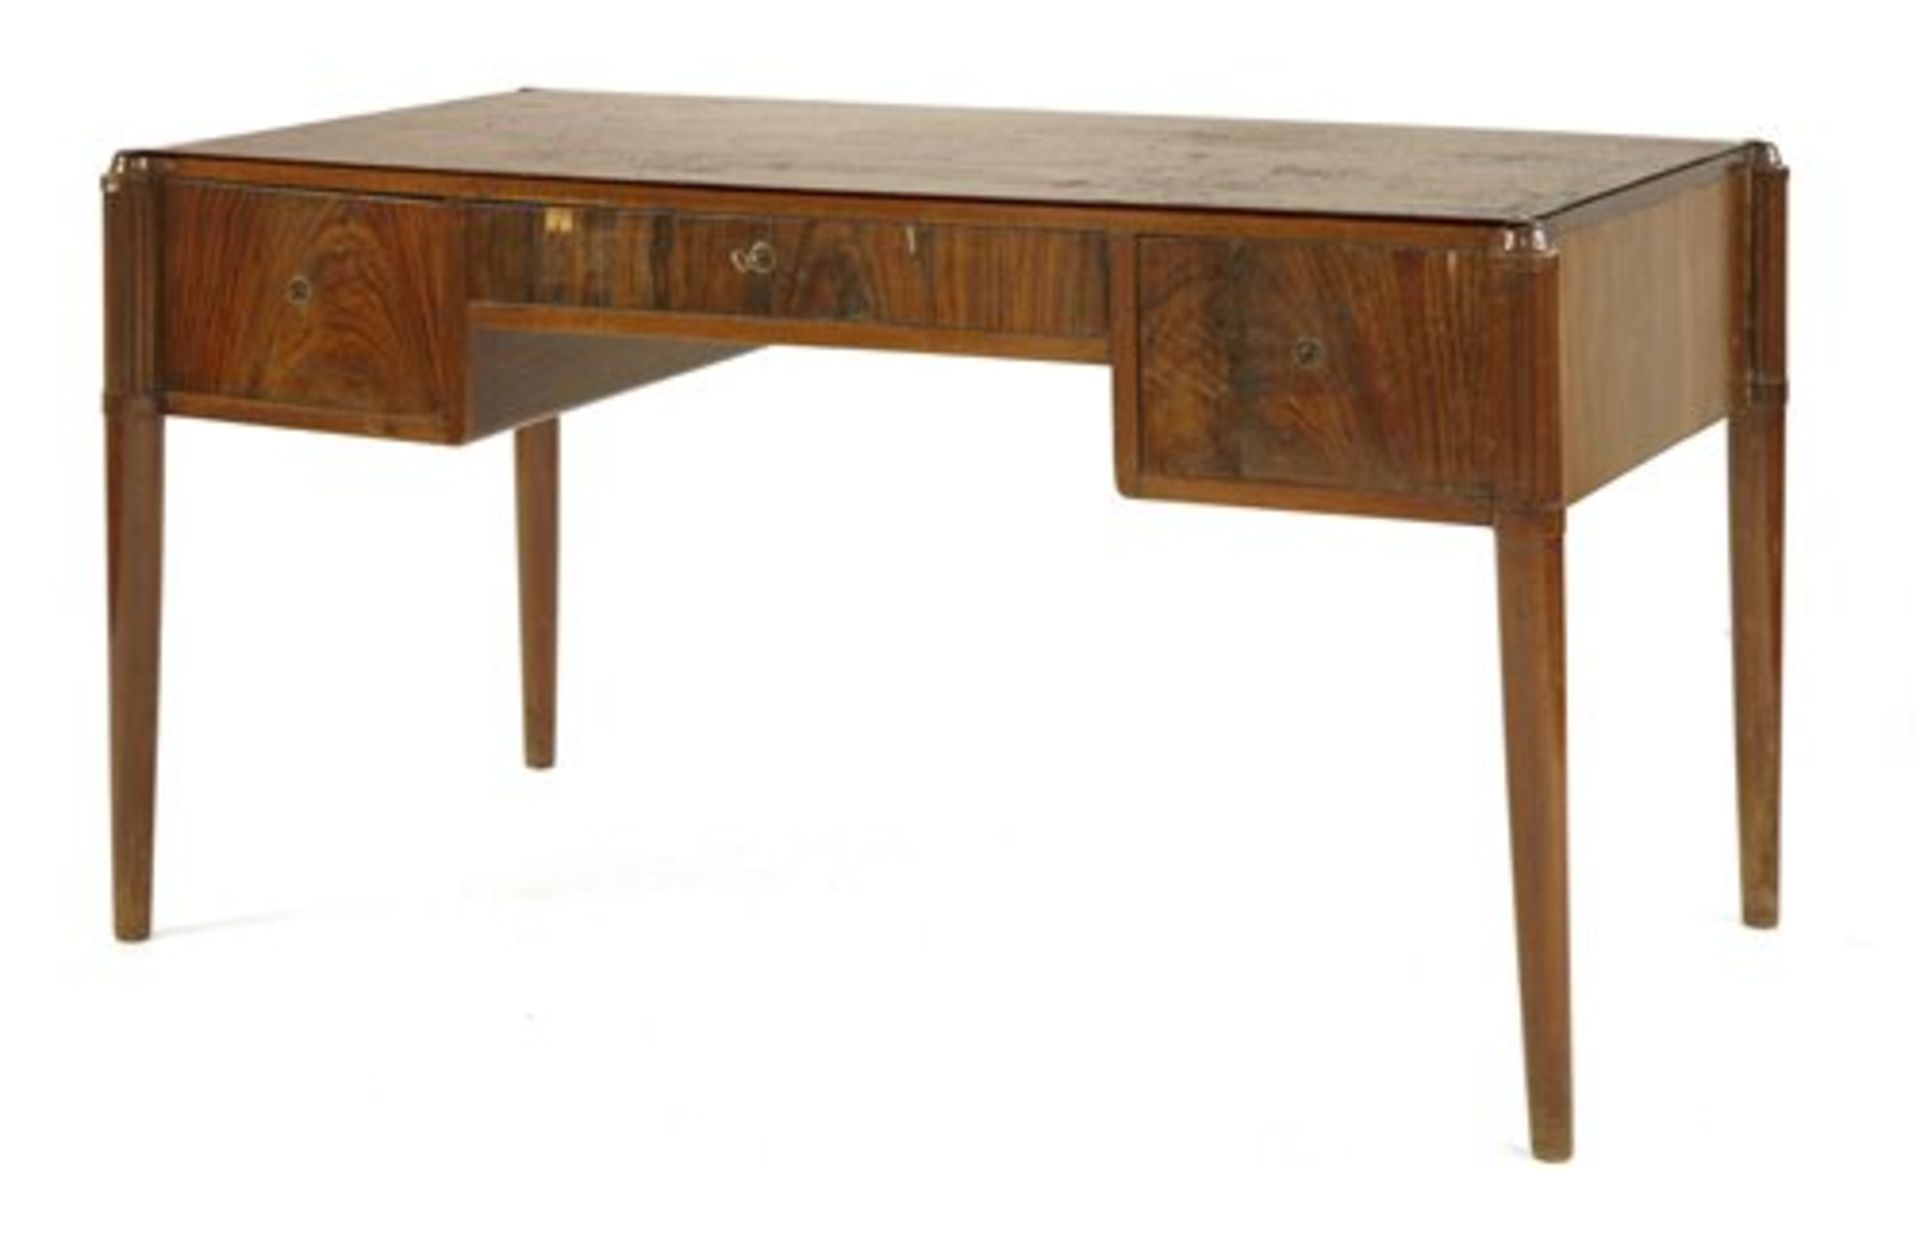 A French rosewood desk